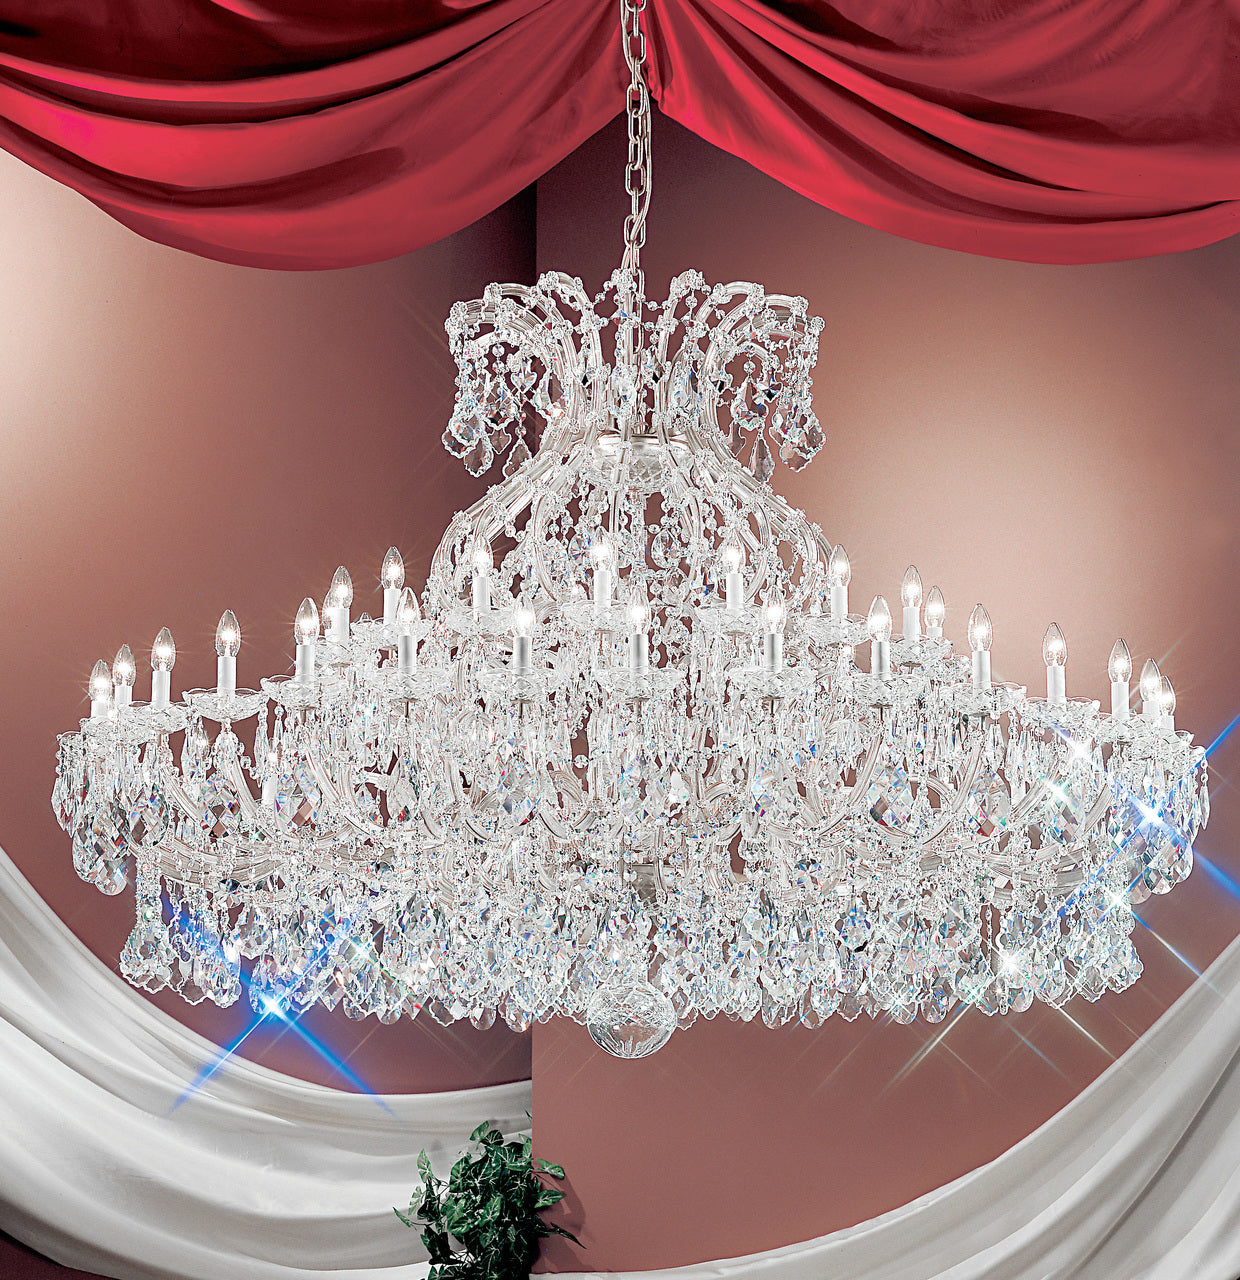 Classic Lighting 8168 CH C Maria Theresa Traditional Crystal Chandelier in Chrome (Imported from Italy)